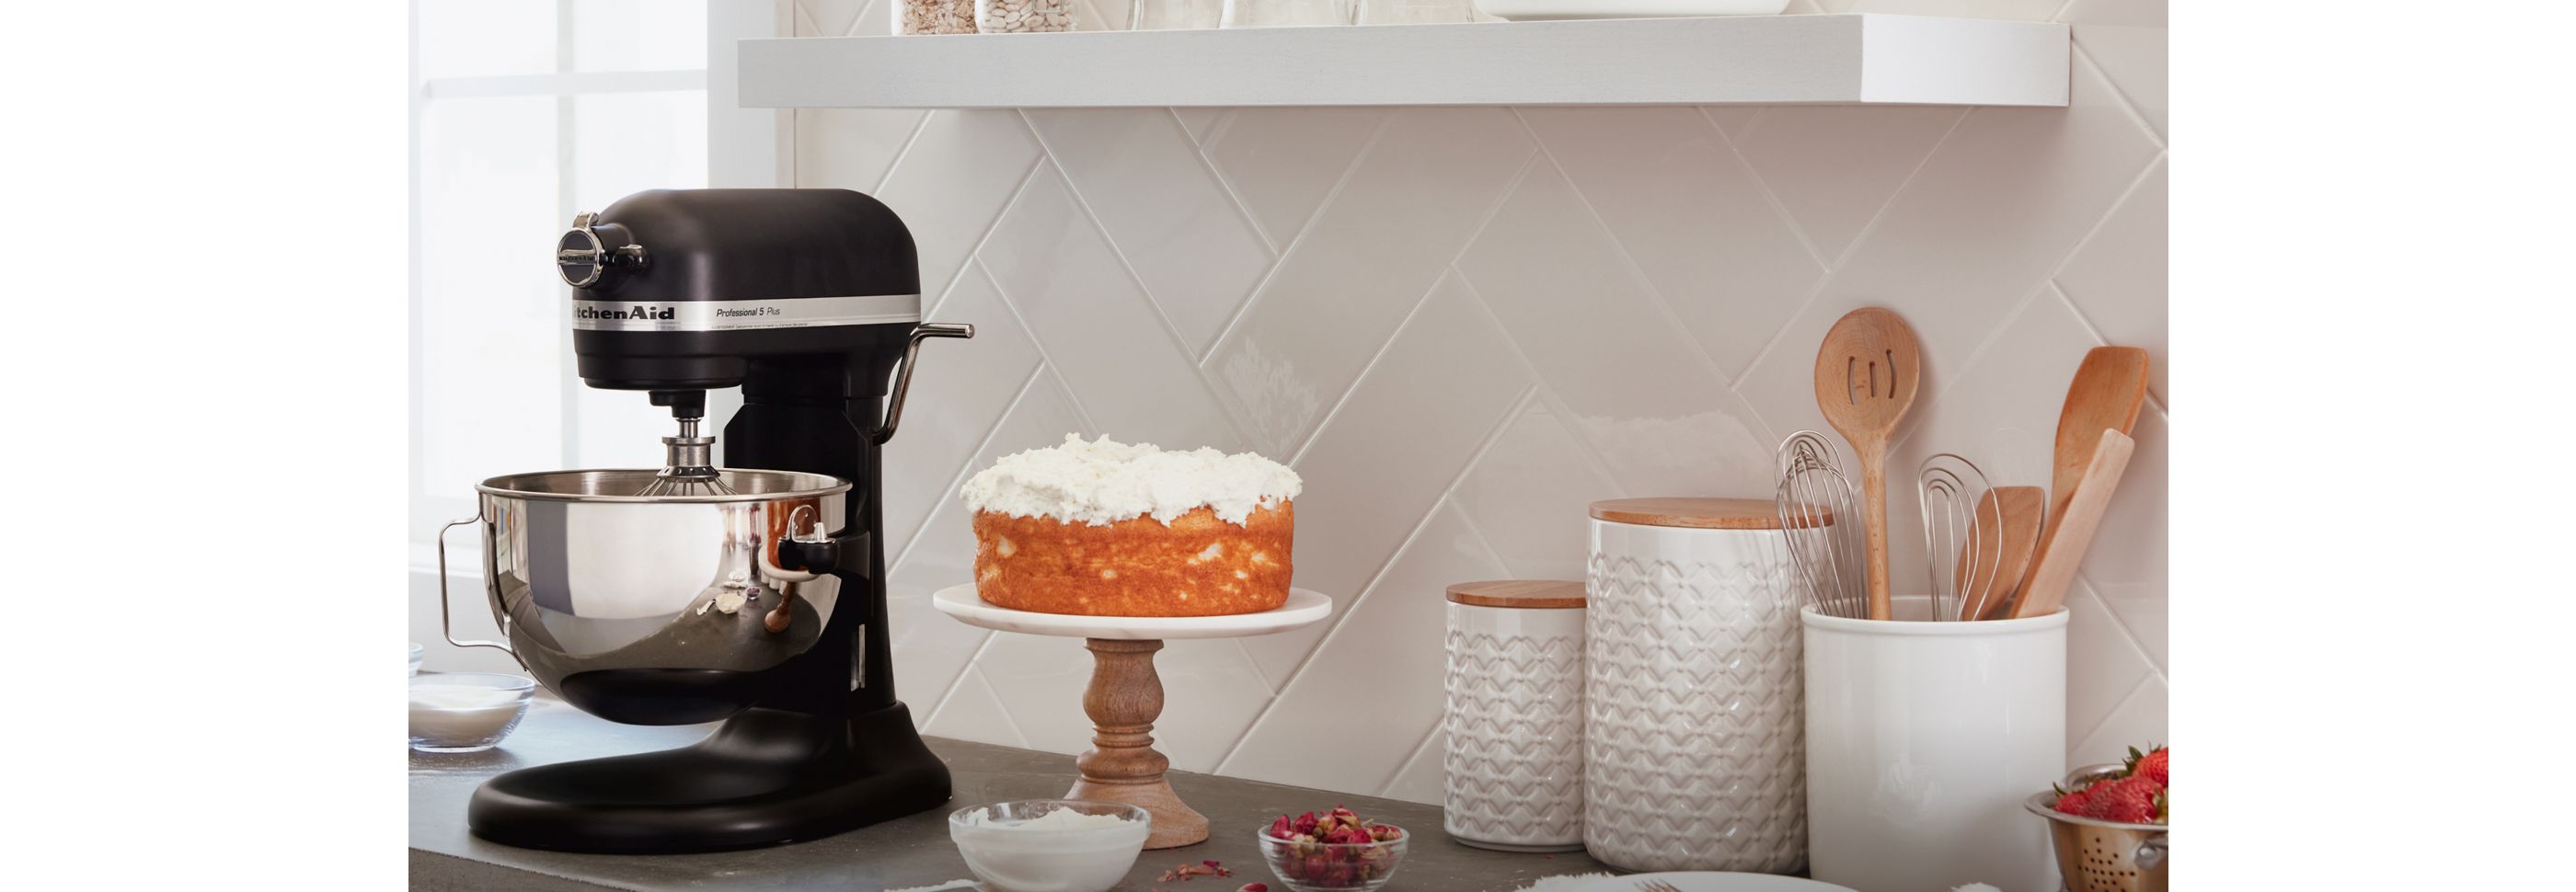 A KitchenAid® Stand Mixer on counter beside a cake